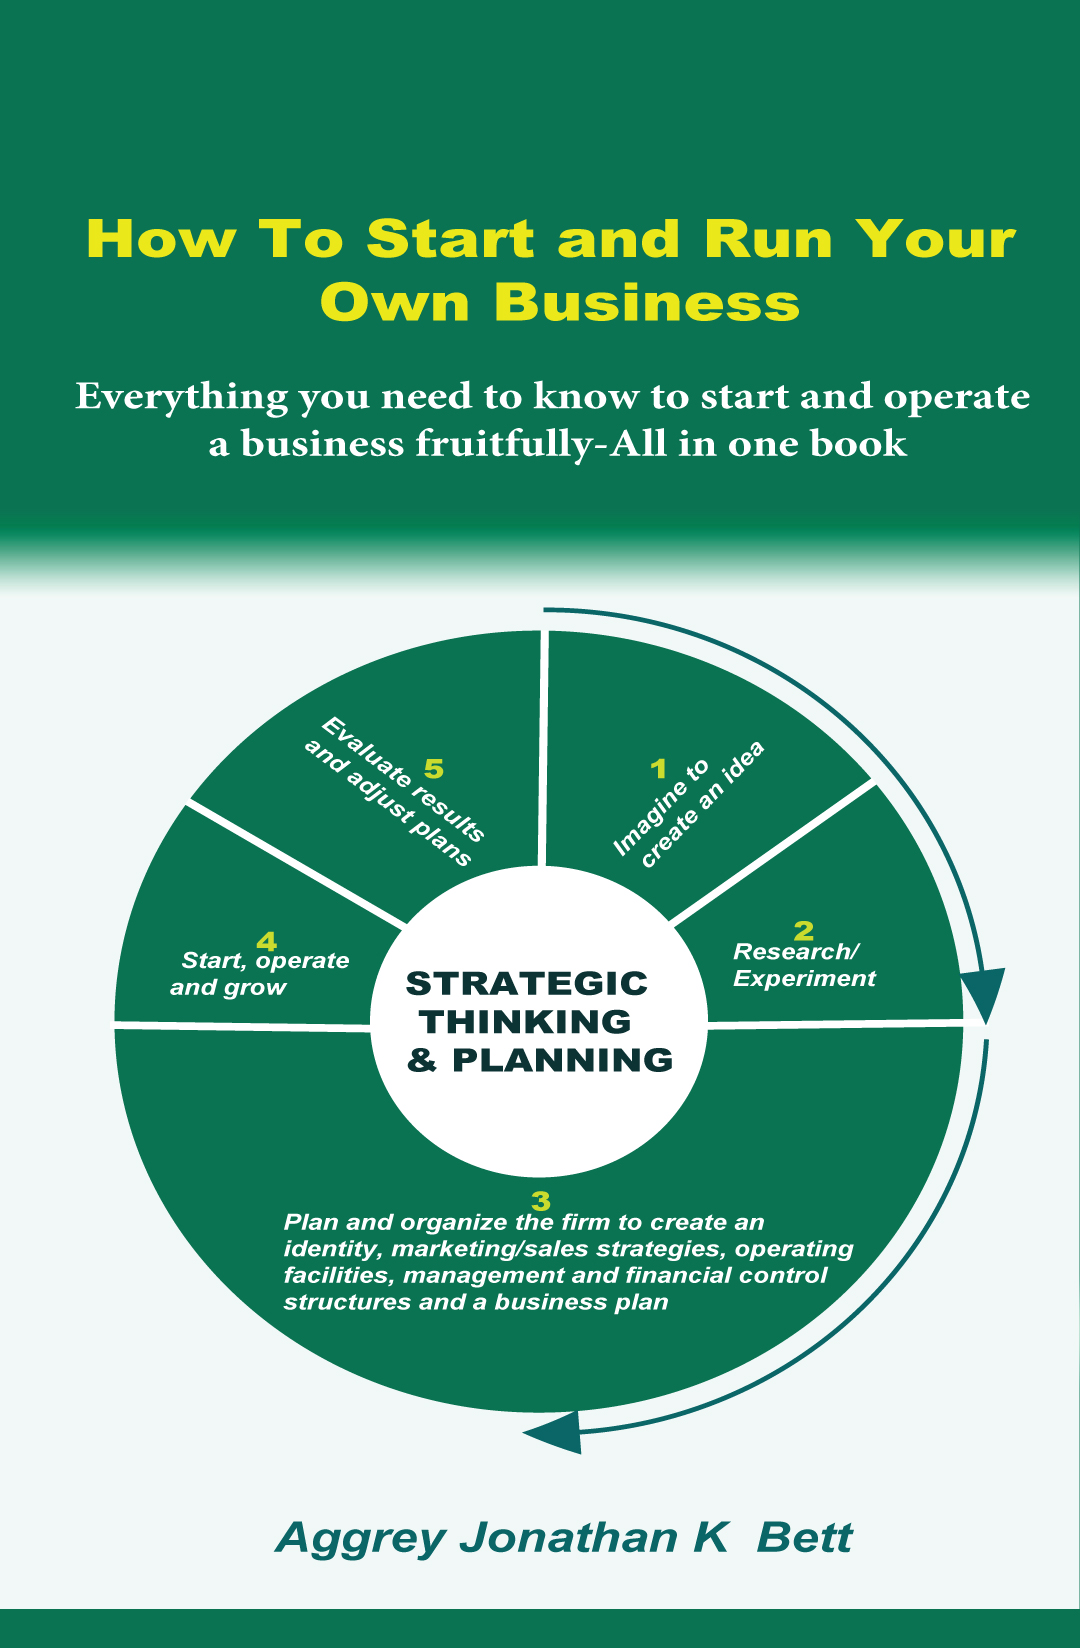 Book-cover-How-to-Start-and-Run-your-own-Business-web image